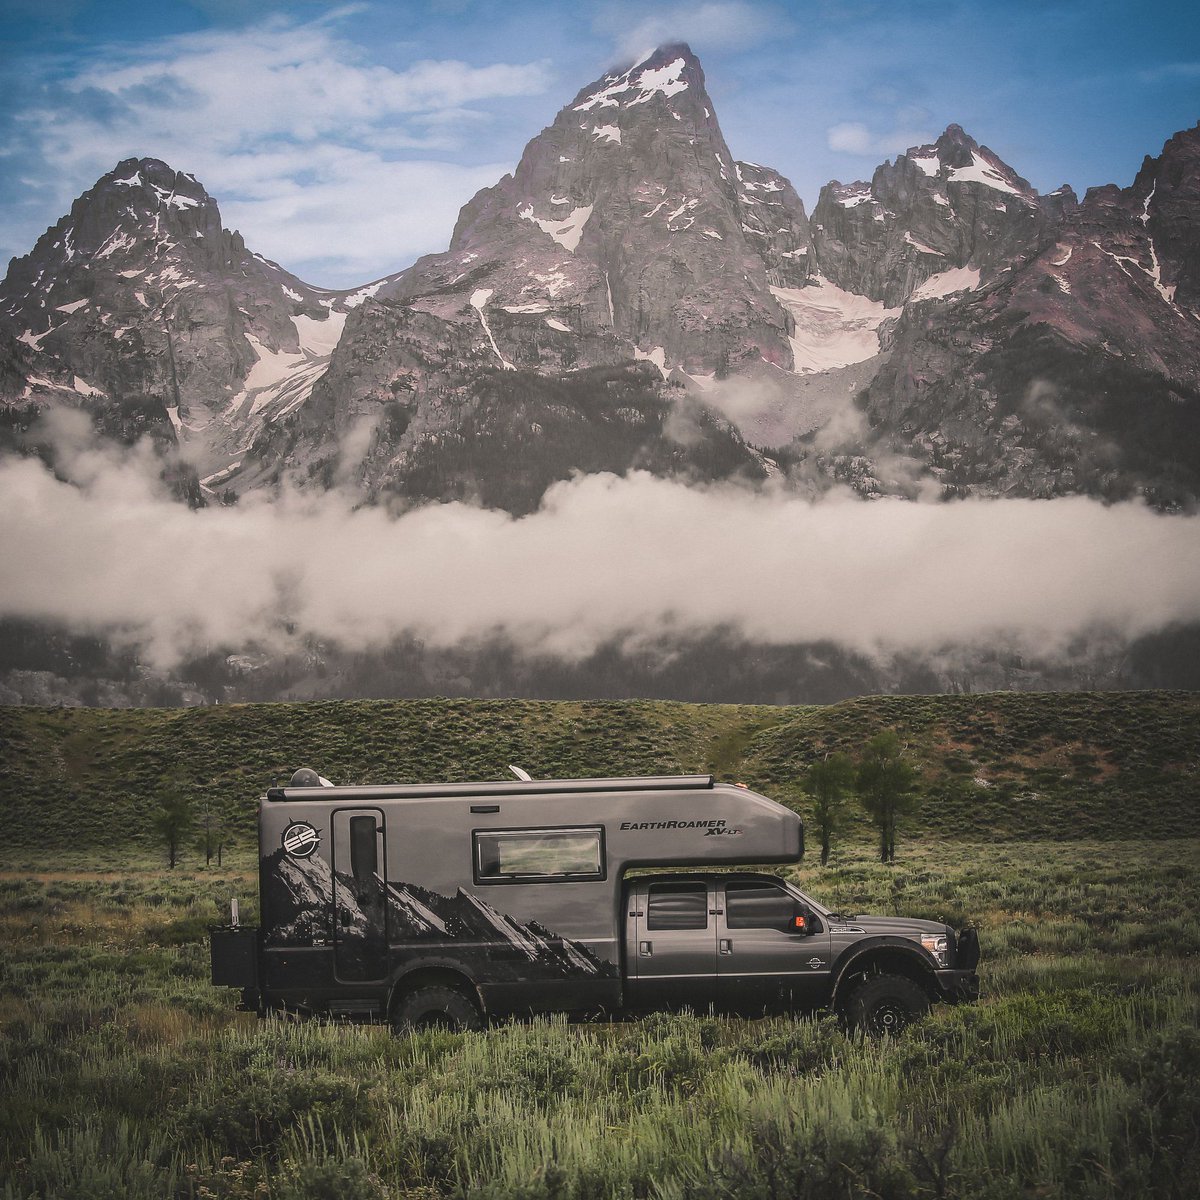 Waking up to mountain vistas that take your breath away, and the journey's just begun 🌄 · · · #earthroamer #offroad4x4 #expeditionvehicle #campinglife #overlanding #4x4life #4x4trucks #vanlife #vanlifeadventures